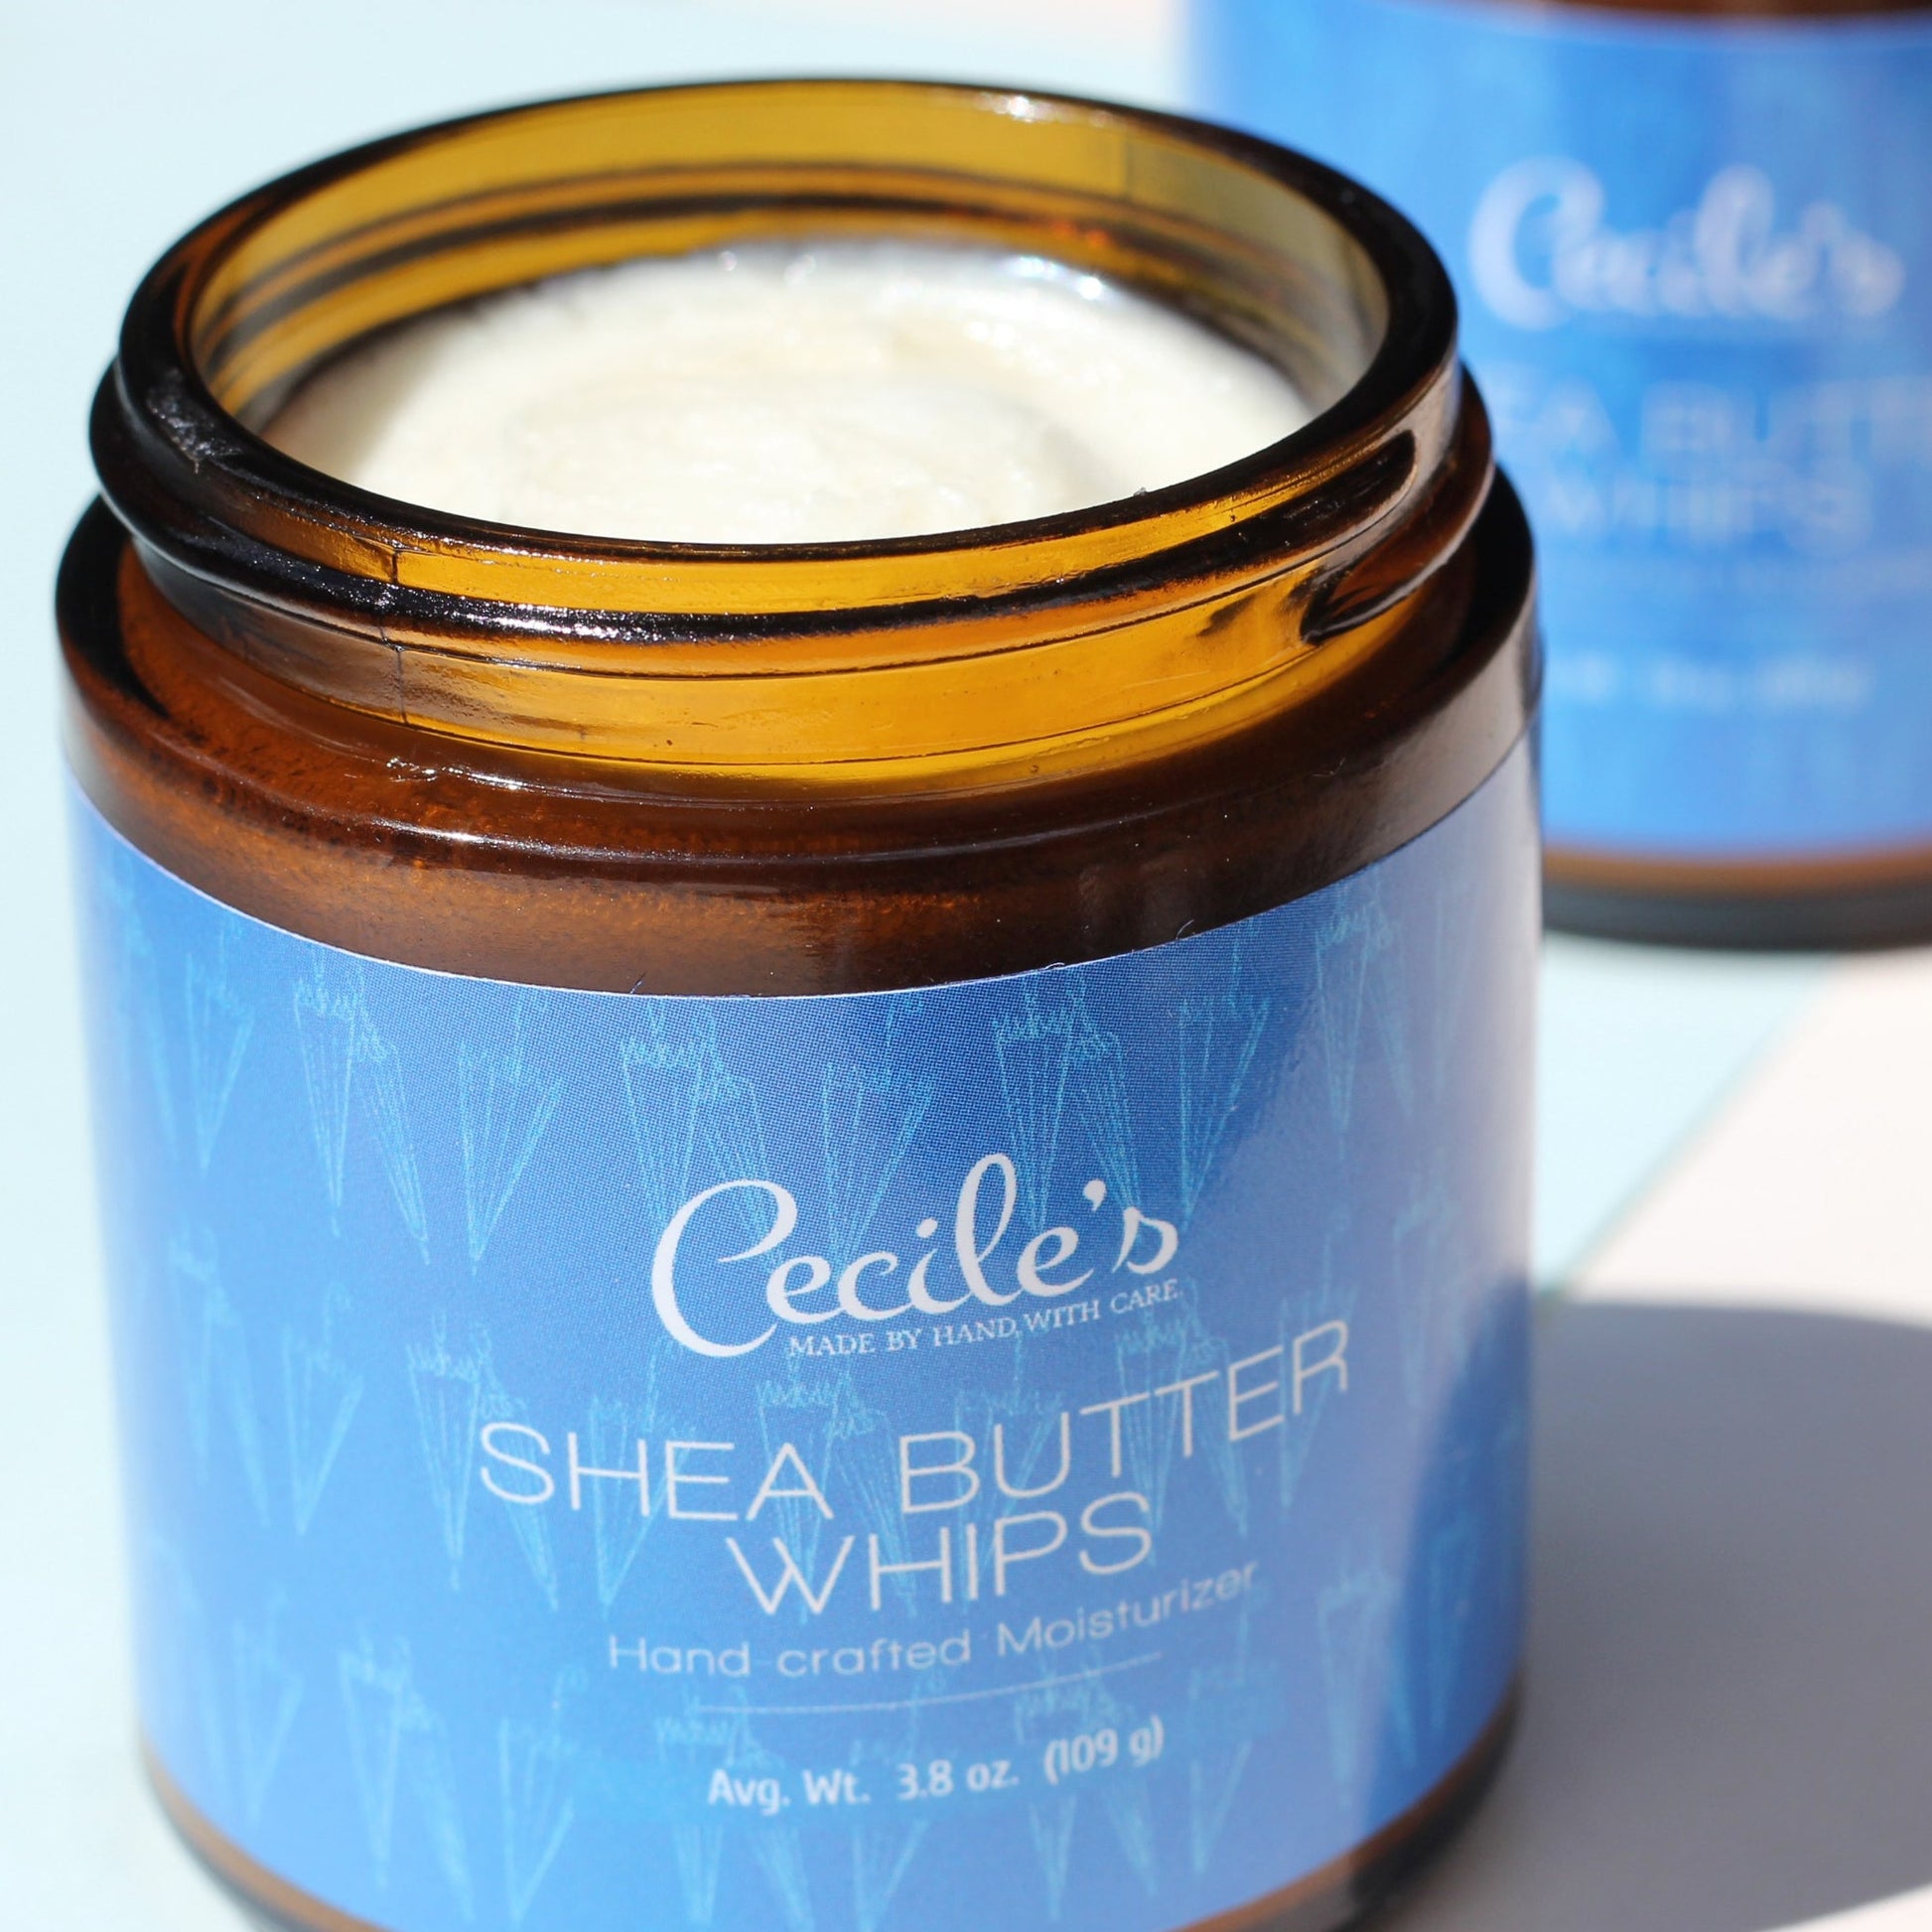 Cecile's Shea Butter Whip using organic shea butter from Ghana